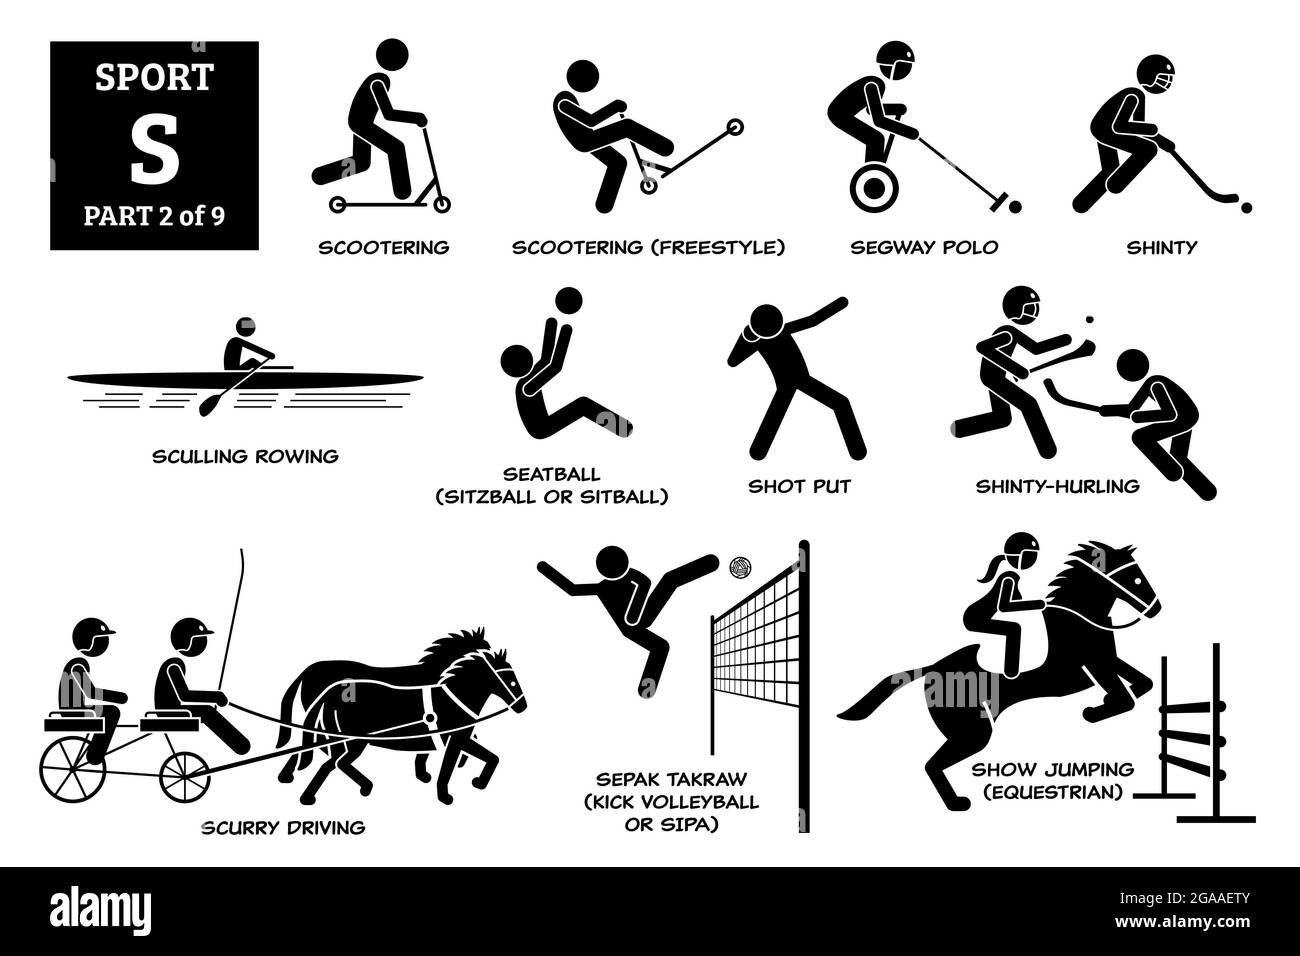 Sport games alphabet S vector icons pictogram. Scootering, scooter freestyle, segway polo, shinty, sculling rowing, seatball, shot put, shinty hurling Stock Vector